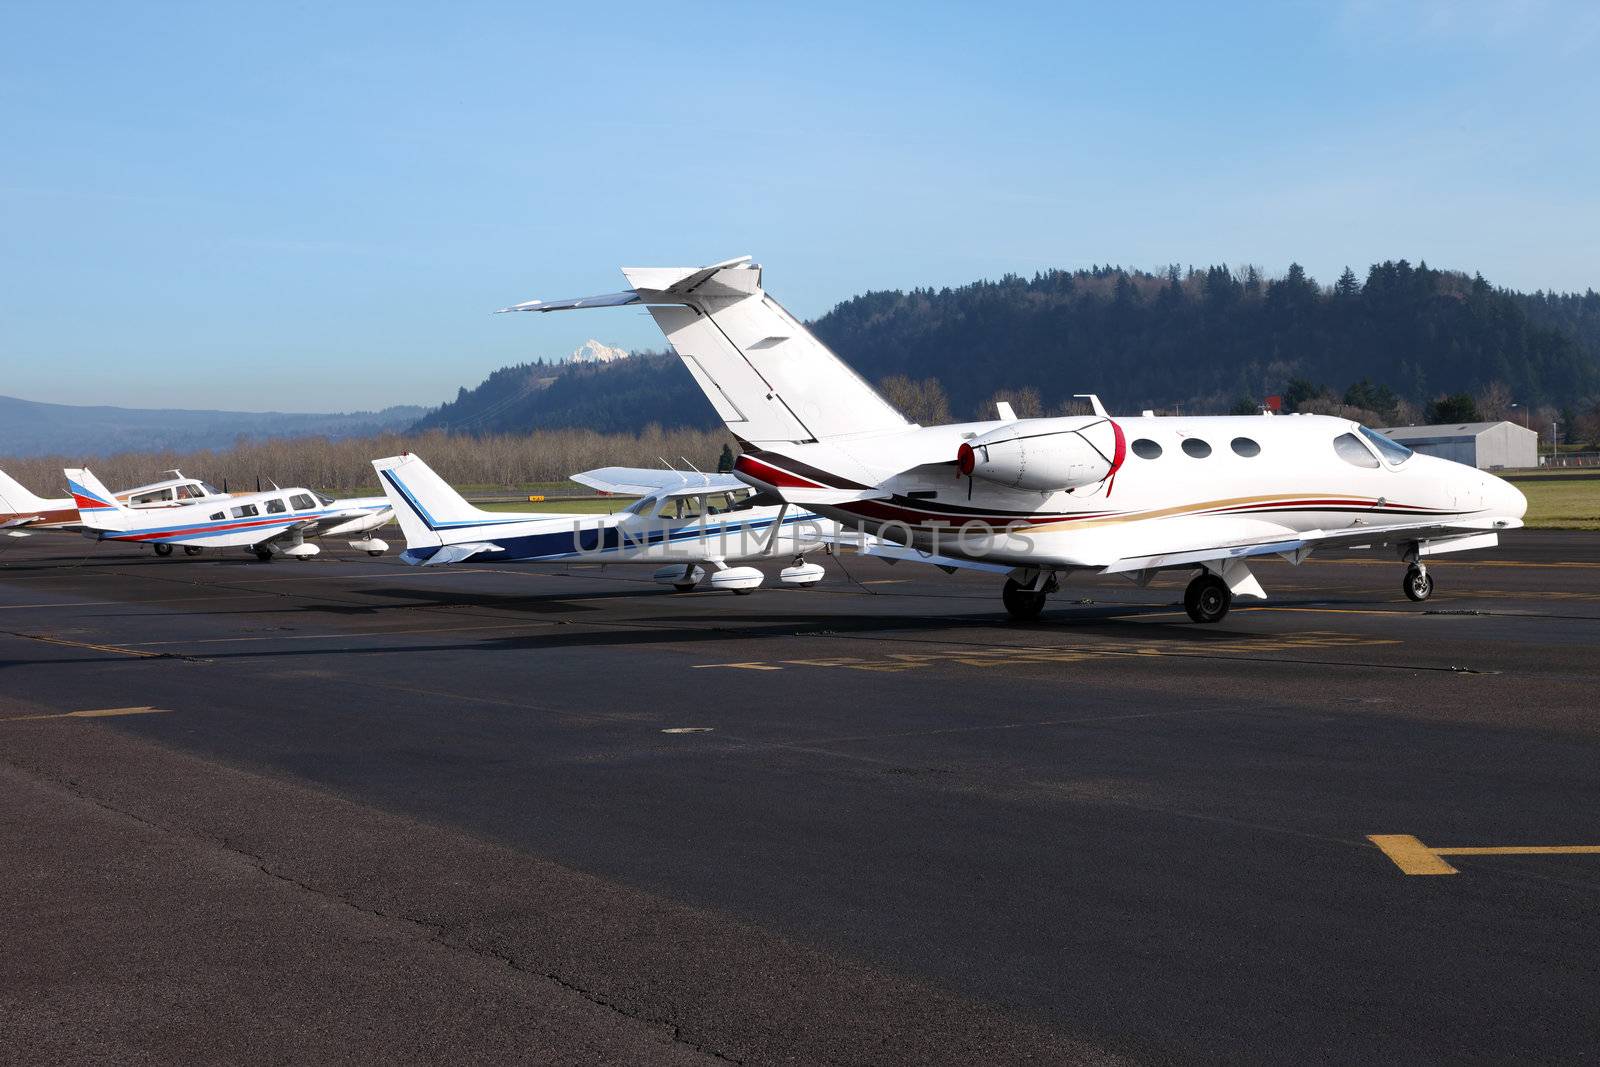 Aircraft of different models parked at the Troudale airport near Portland Oregon.